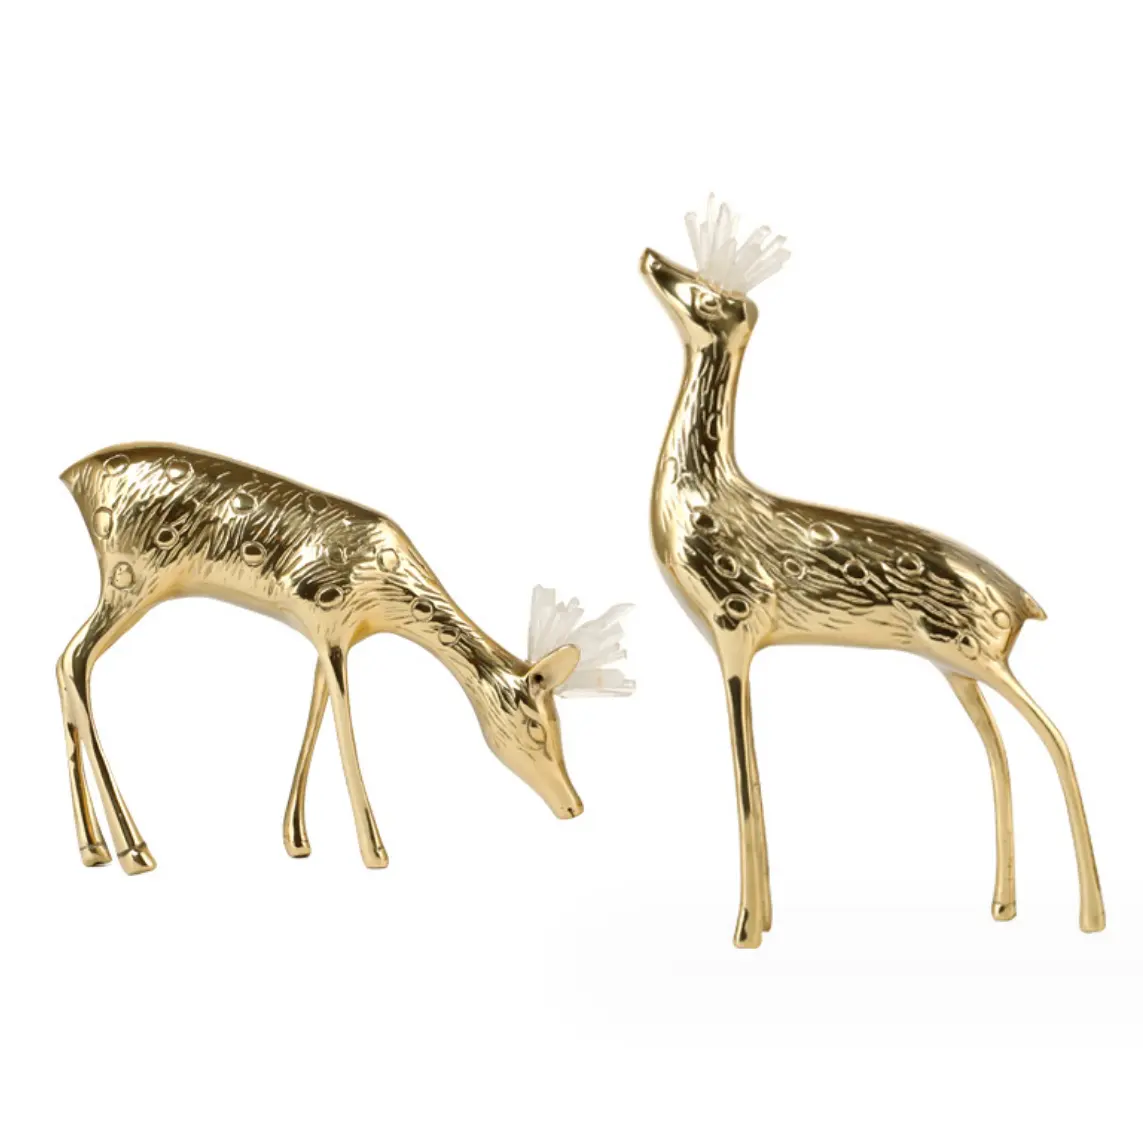 Gold Colors Resin Crafts Figures Home Decoration Gold Metal Figure Home Ornament Sika Deer Animal Studio Decor Animals Ornament